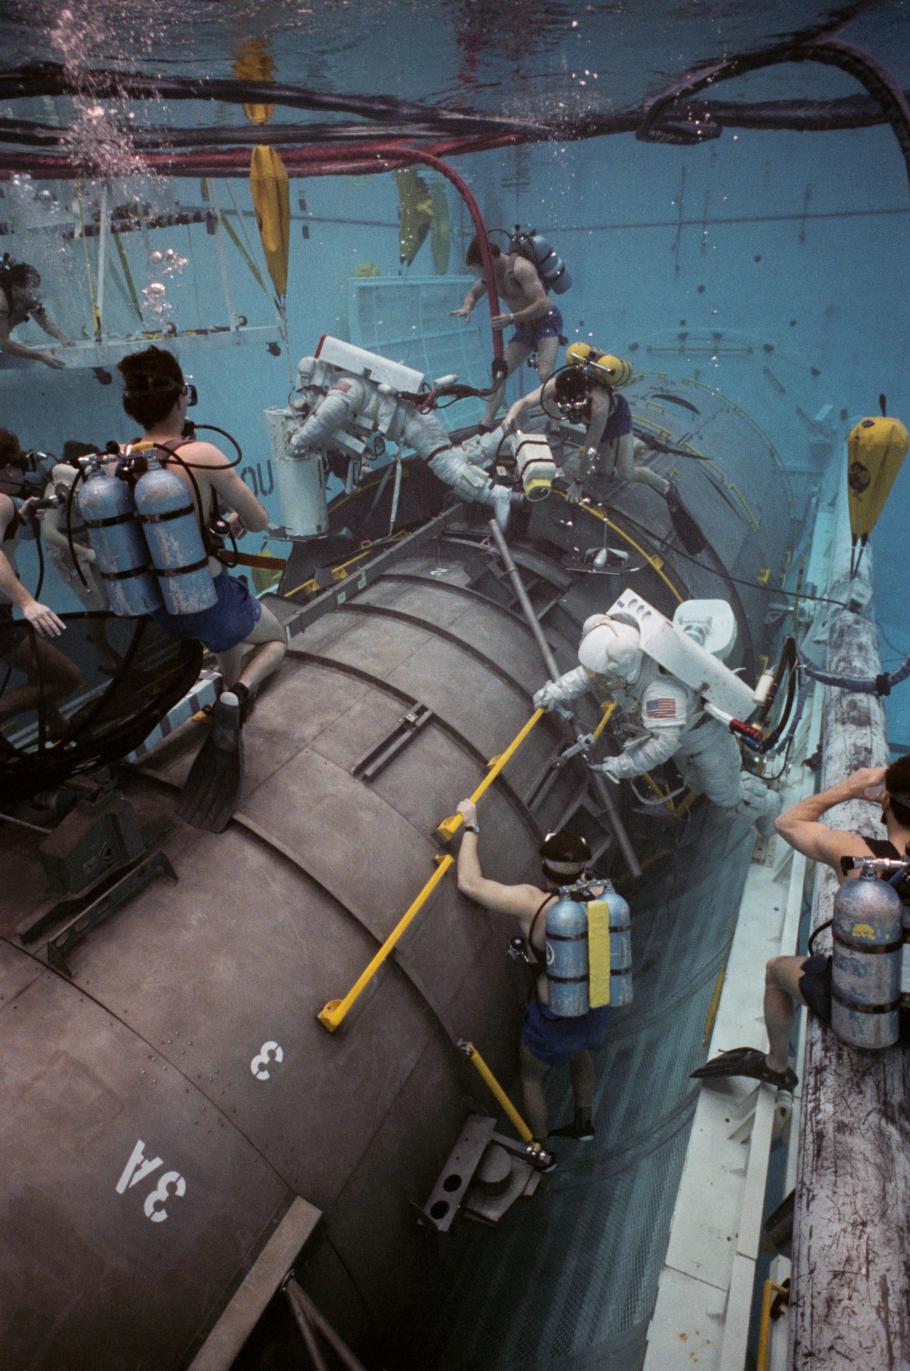 Astronauts participate in underwater training at NASA's Neutral Buoyancy Lab, practicing skills on a life-sized replica of a spacecraft module. Divers, wearing scuba gear, assist and observe the simulation.